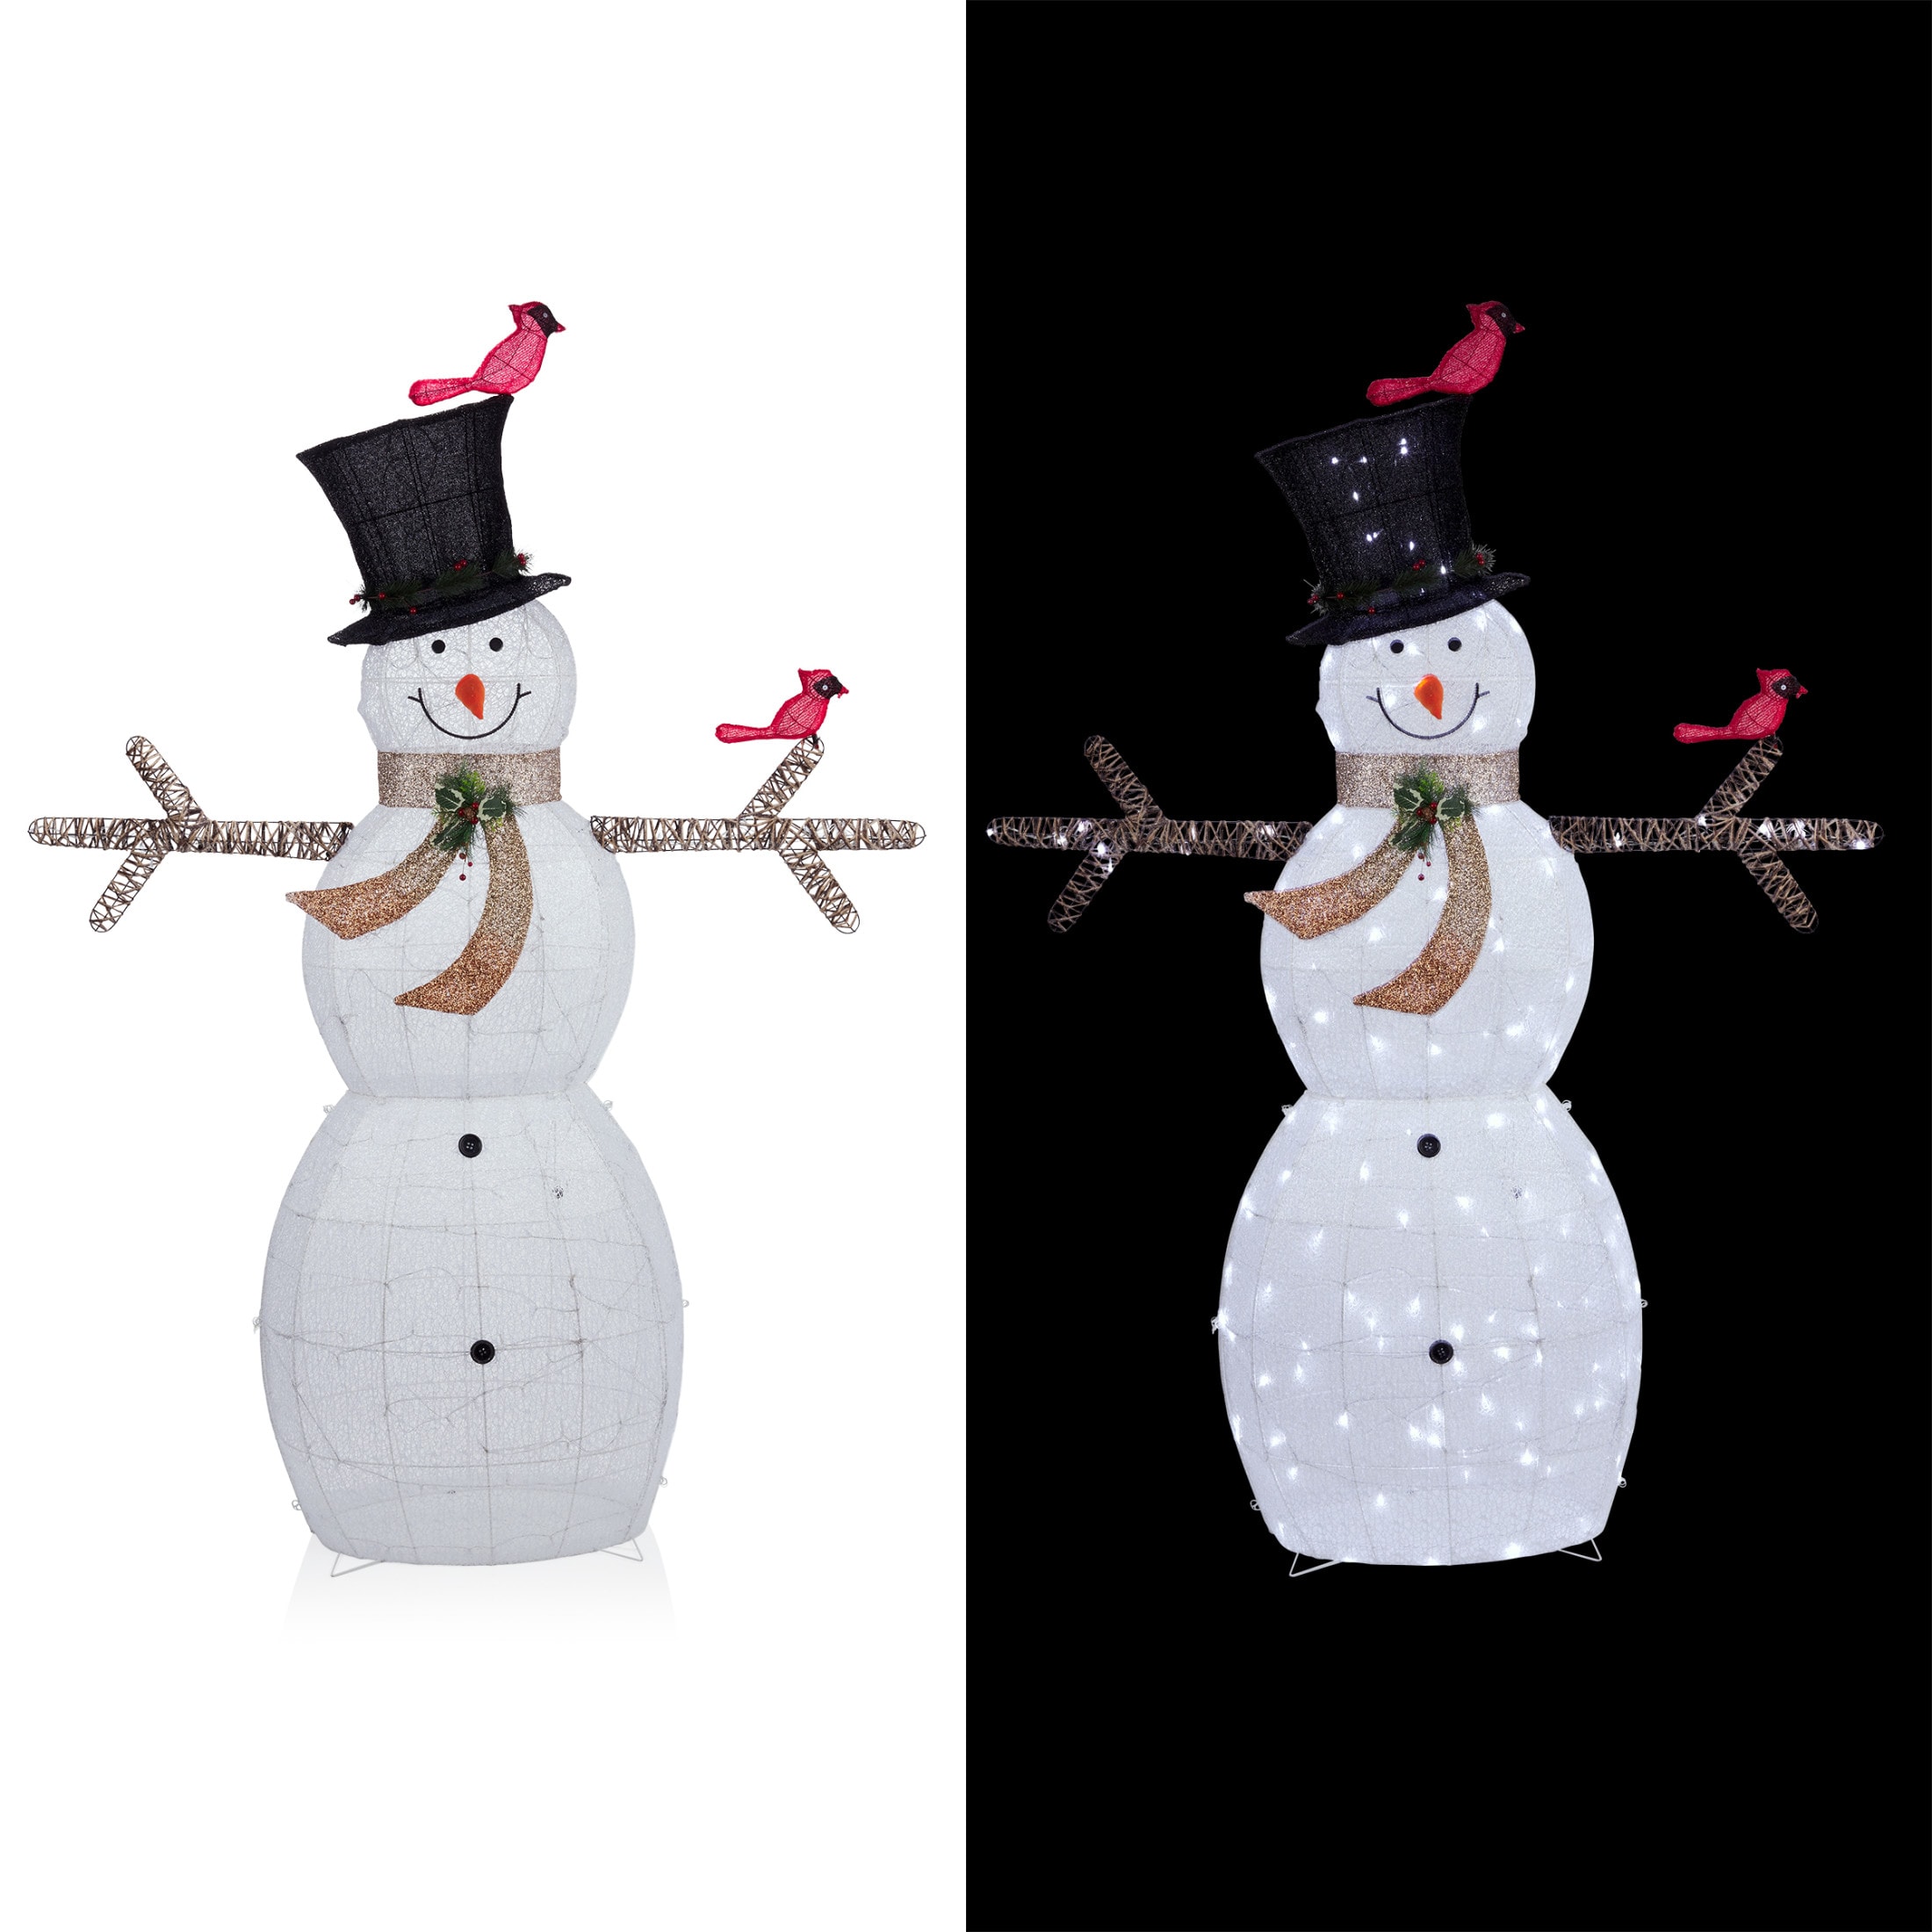 Home Depot Is Selling an Iridescent Reindeer and Snowman for a Sparkling  Christmas